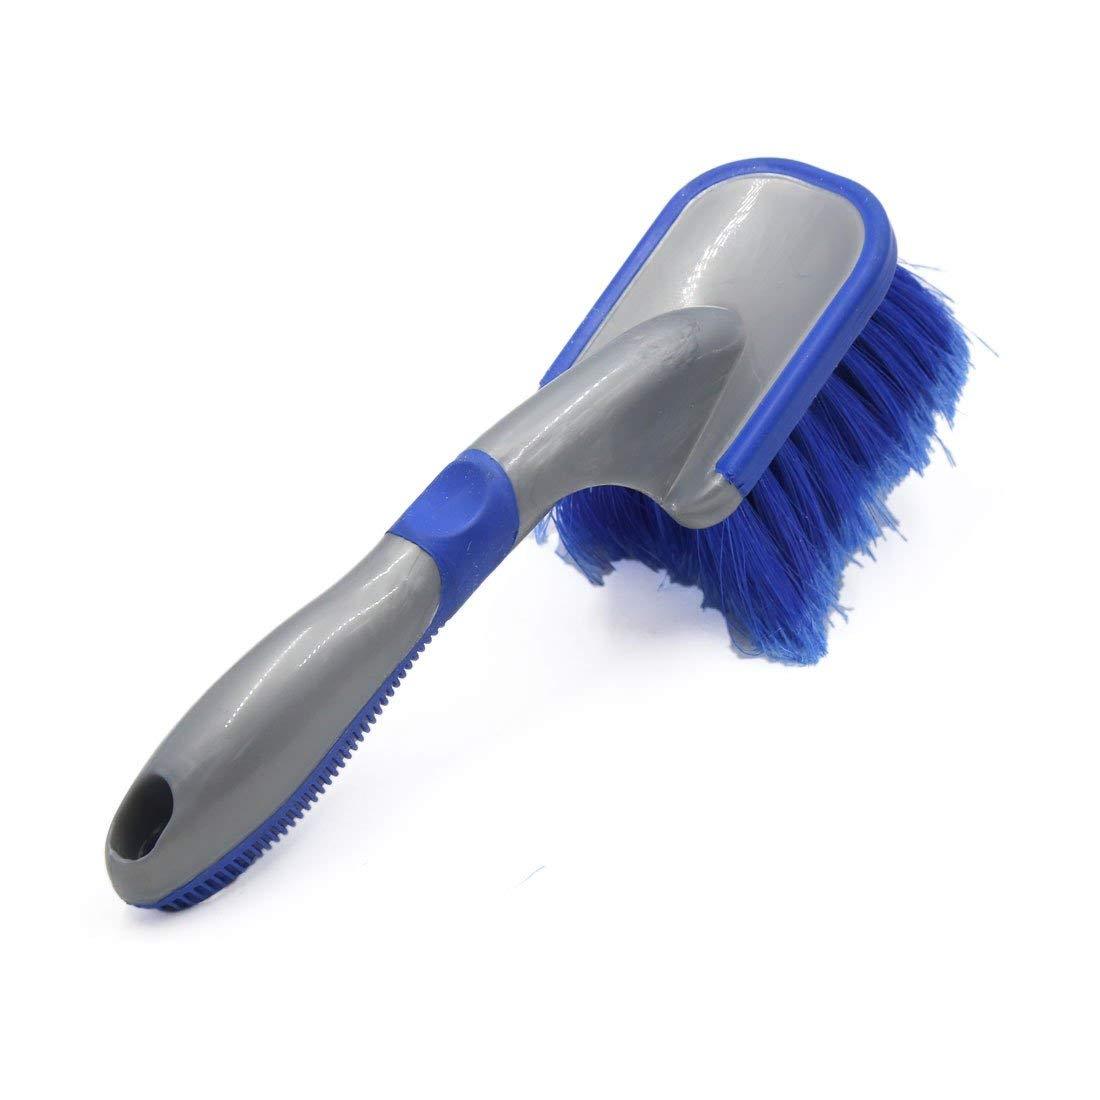 LZ Wheel Brush - 2 PCS tire Brush Floor Scrub Brush Wheel Brushes for  Cleaning Wheels, Cleaner for Your Car, Motorcycle or Bicycle Tire Brush  Washing